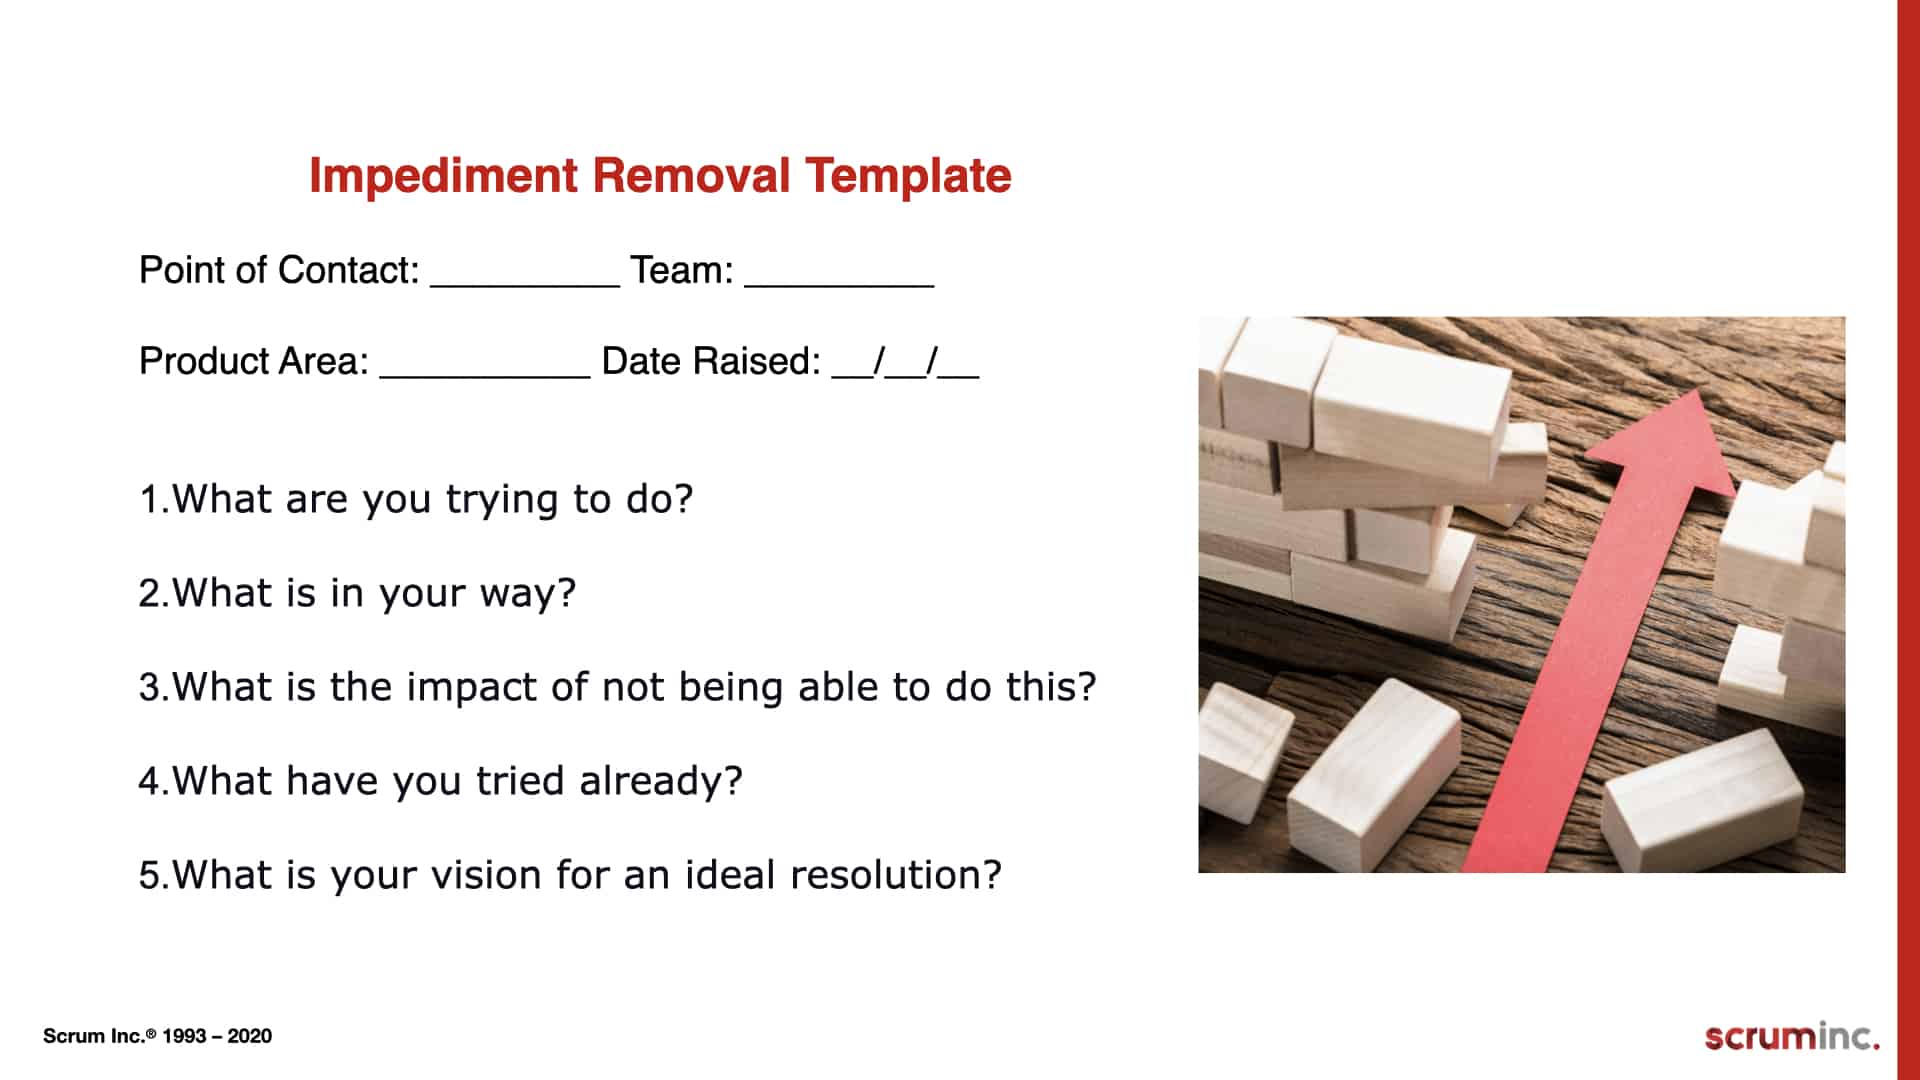 Five Whats Impediment Removal Template